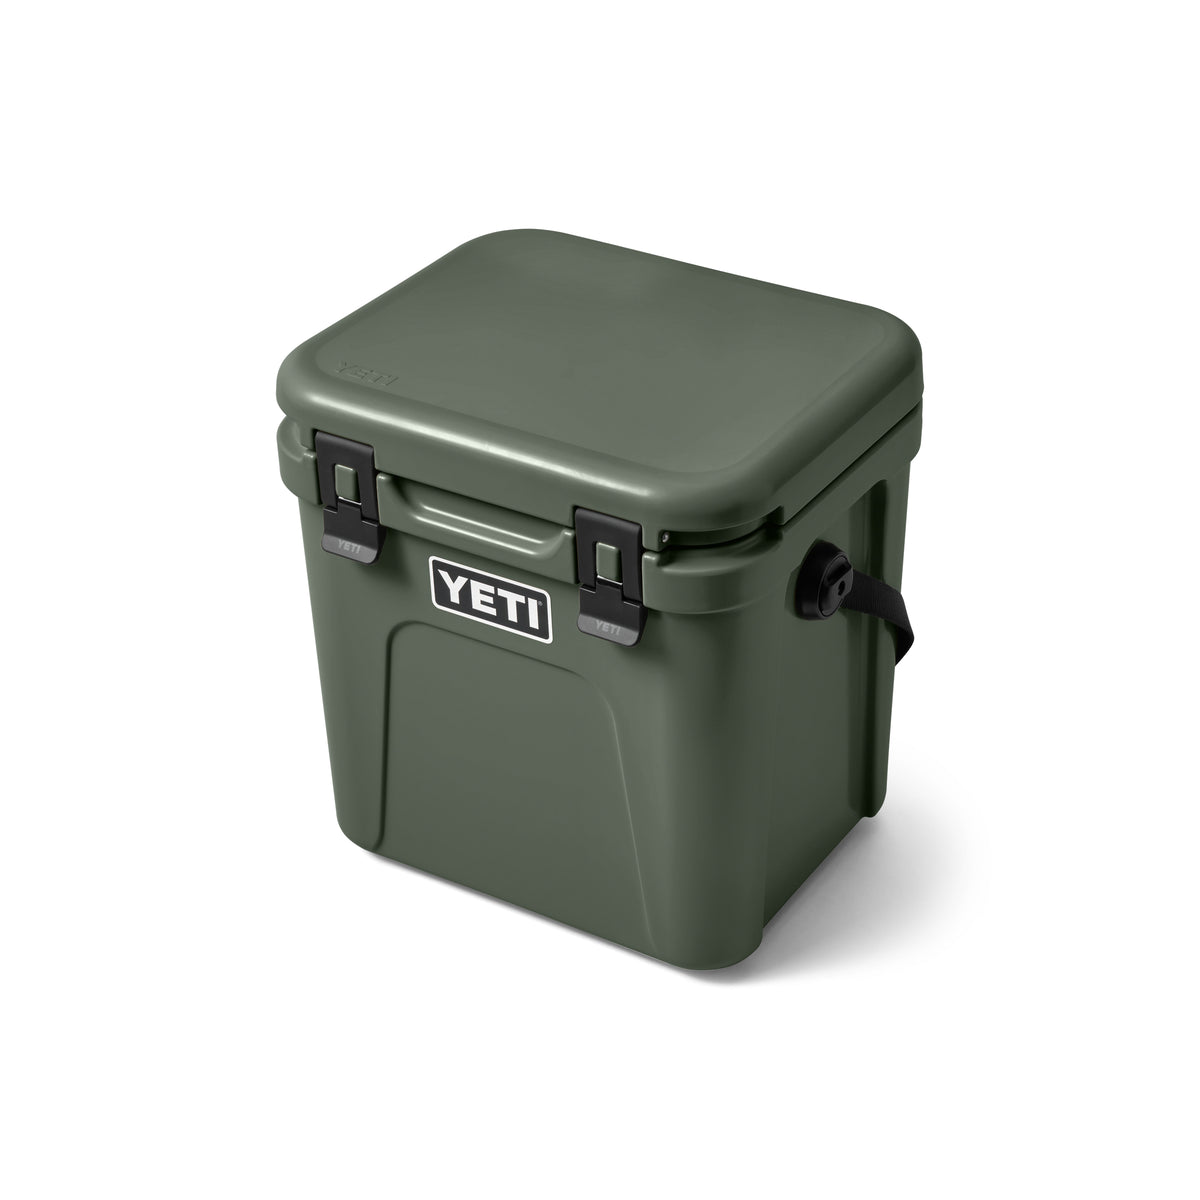 Yeti Roadie 24 Cooler *In Store or Pick up only – Wilderness Sports, Inc.